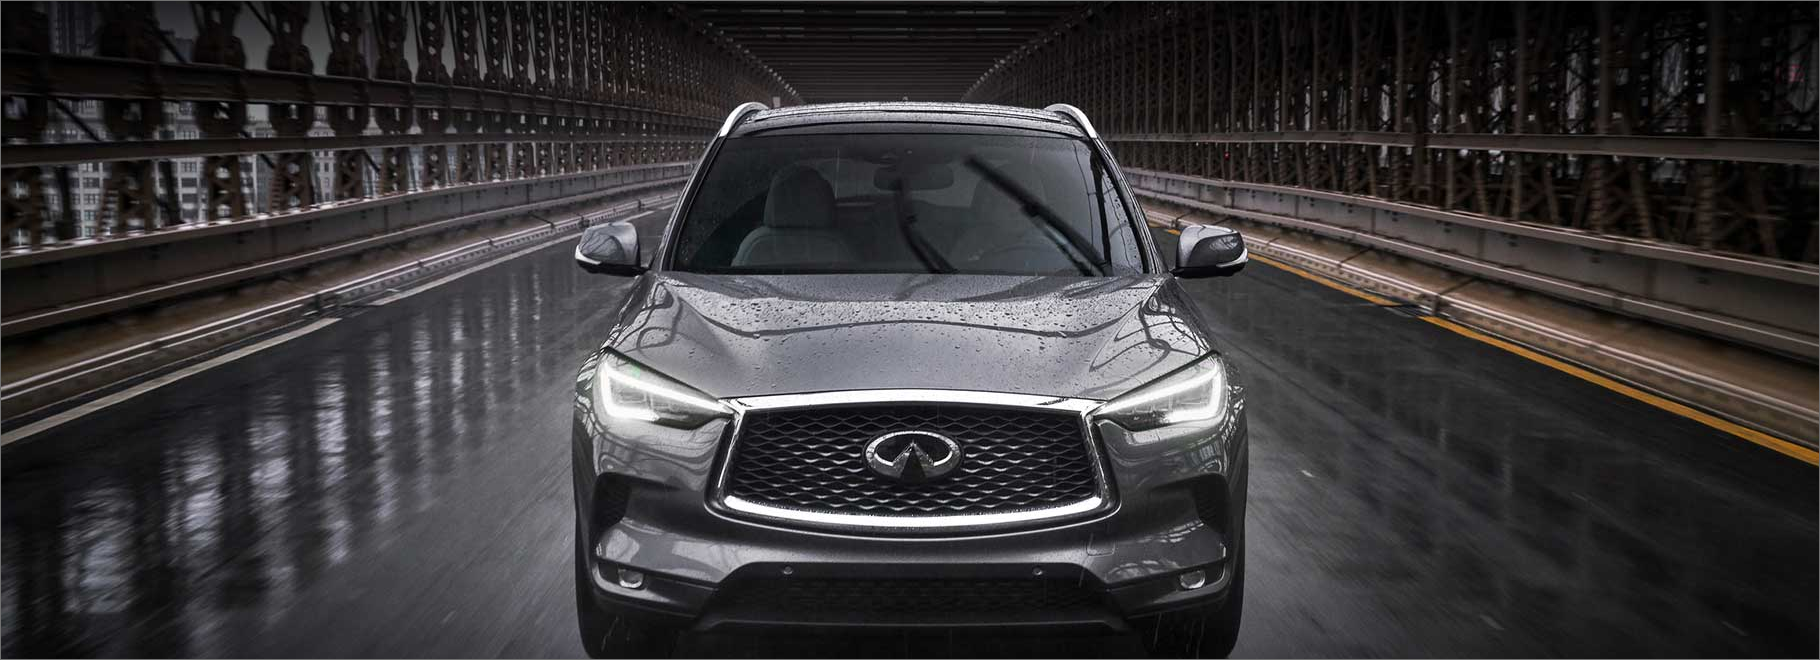 The 2022 INFINITI QX50 is a stylish SUV inside and out. It’s the perfect family SUV. Drive it for yourself at Fort Myers INFINITI today.